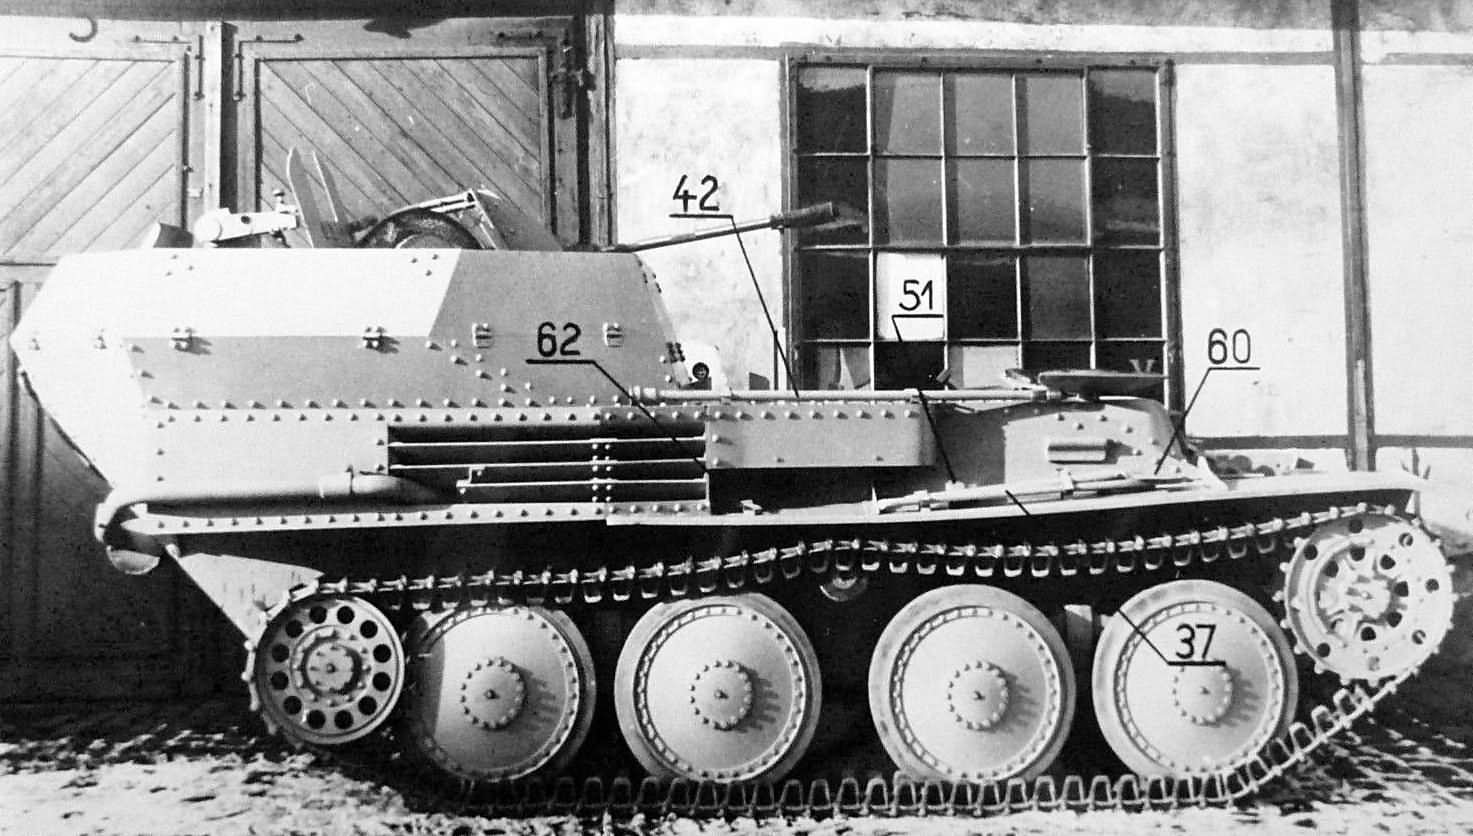 Flakpanzer 38(t) right side view